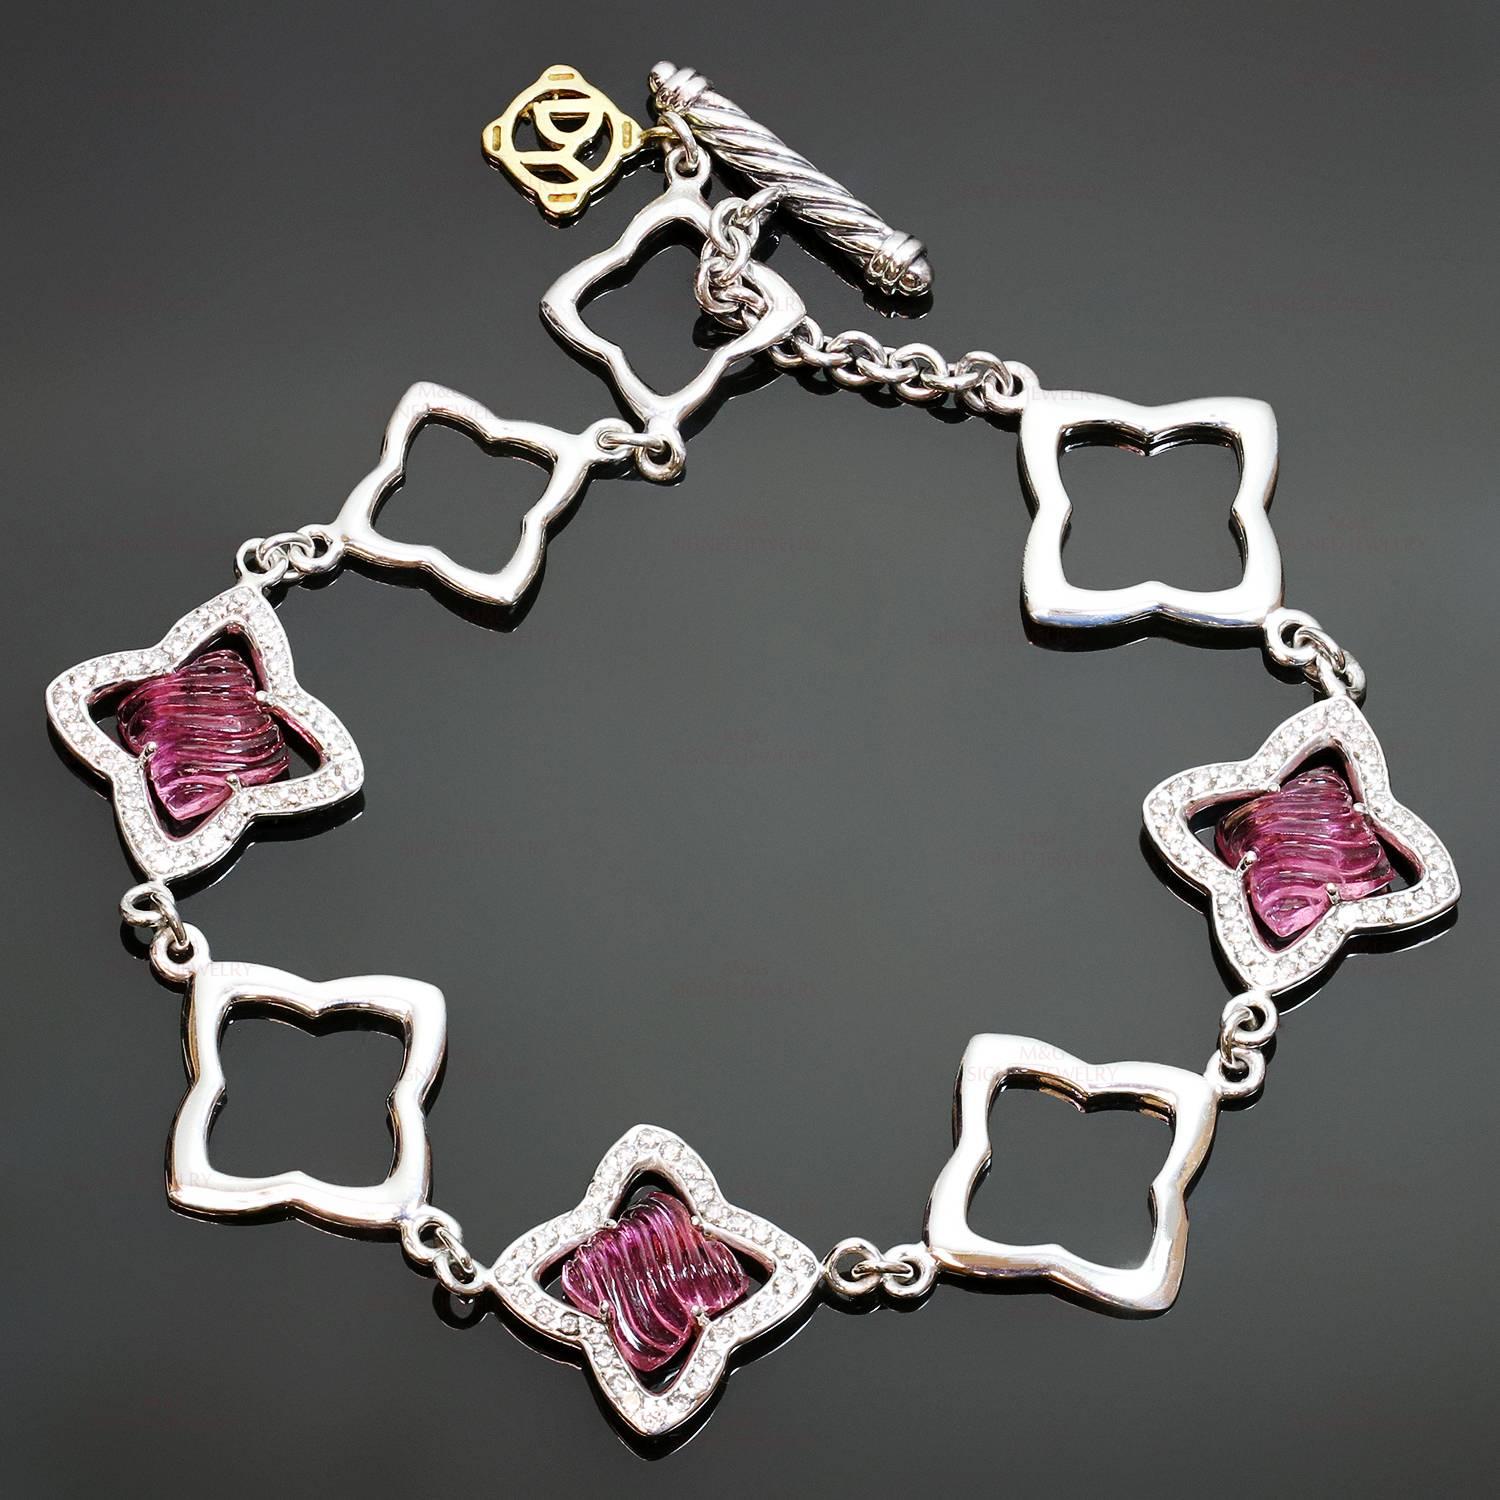 This elegant quatrefoil toggle bracelet is crafted in sterling silver with 18k yellow gold accents and beautifully set with pink tourmaline stones and sparkling diamonds of an estimated 1 carat. Made in United States. Measurements: 0.66